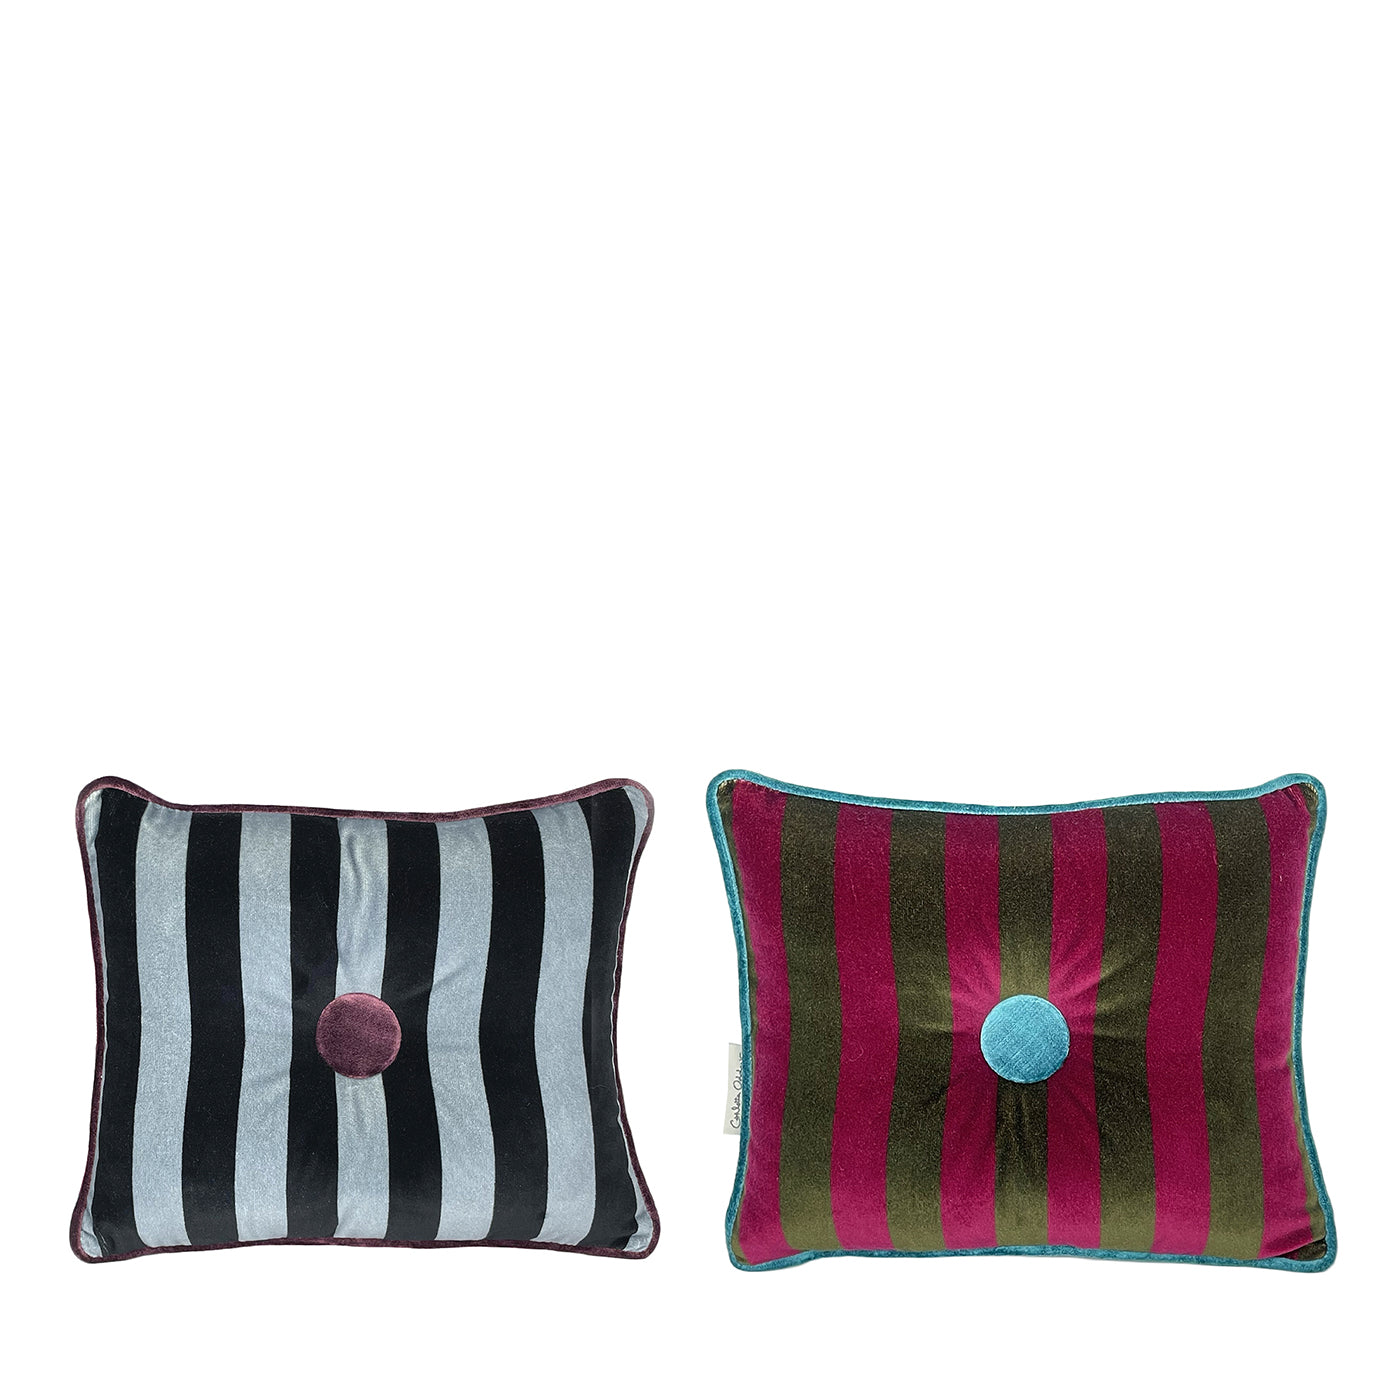 Cojines Sweet Pillow Jeans y Forest Green - Vista principal